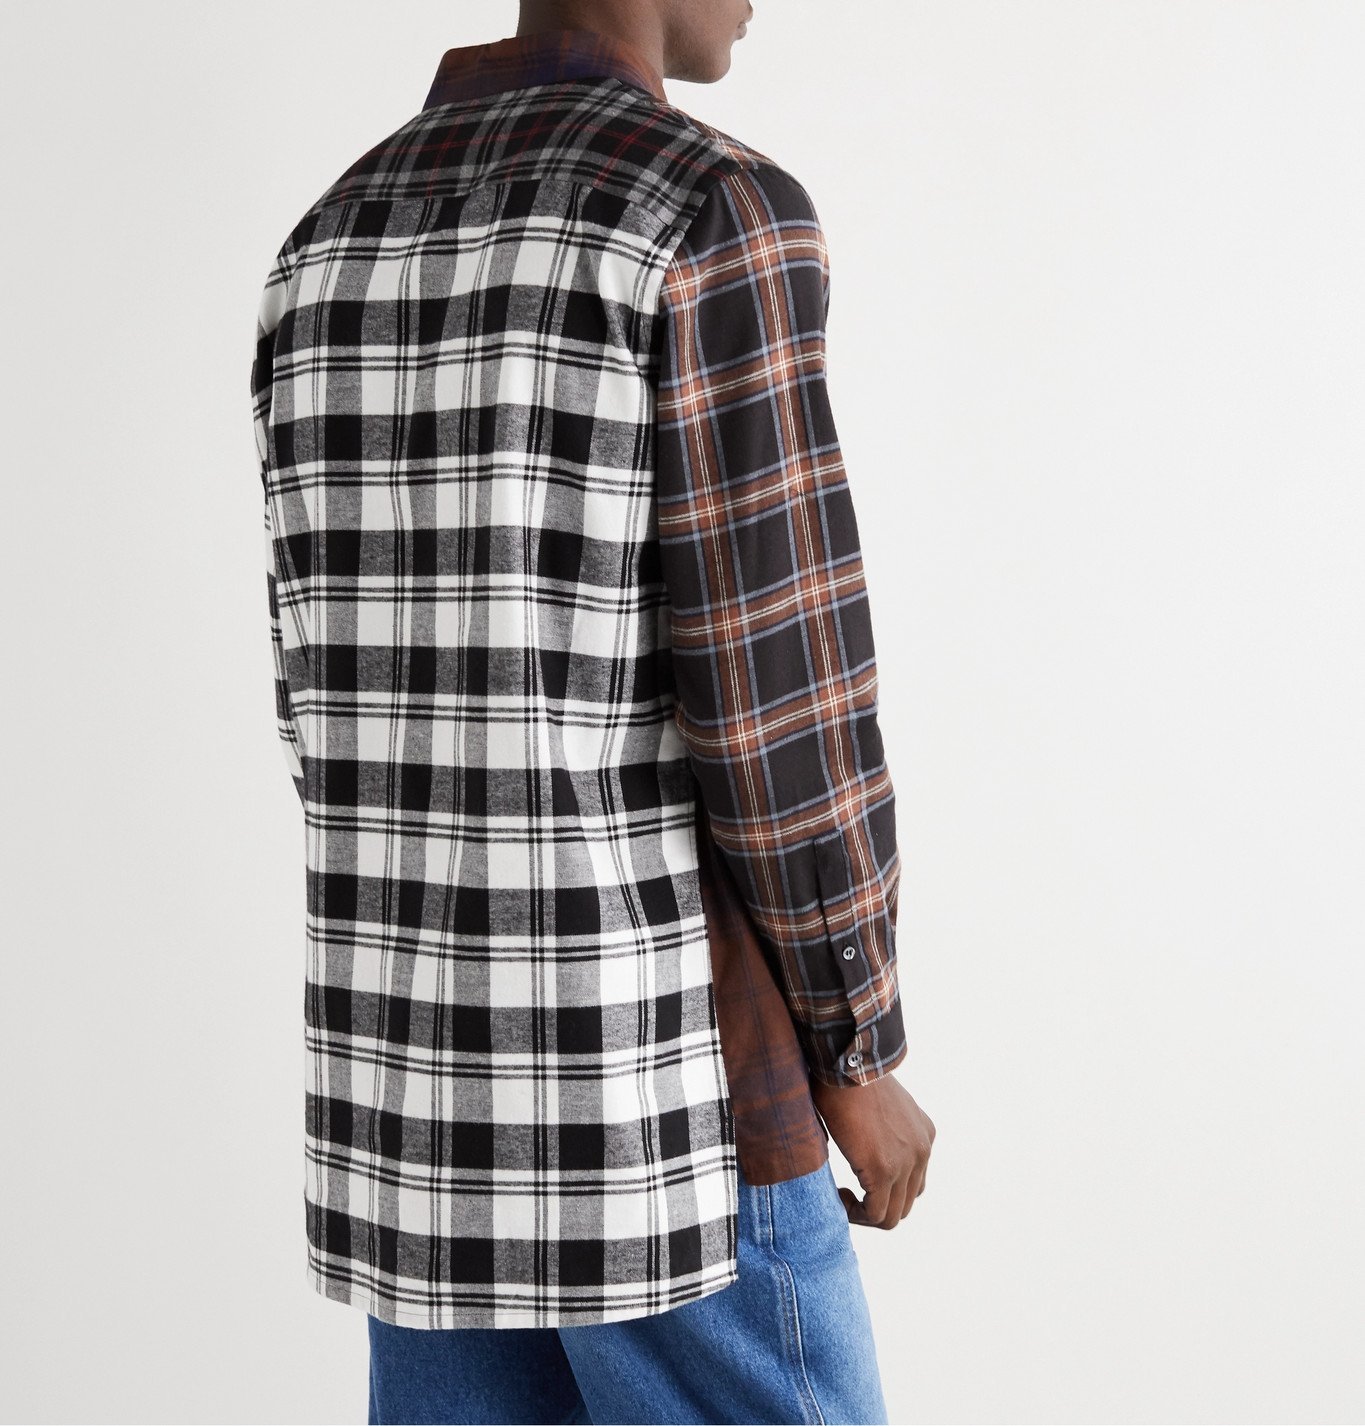 Loewe - Leather-Trimmed Patchwork Checked Cotton-Flannel Shirt 